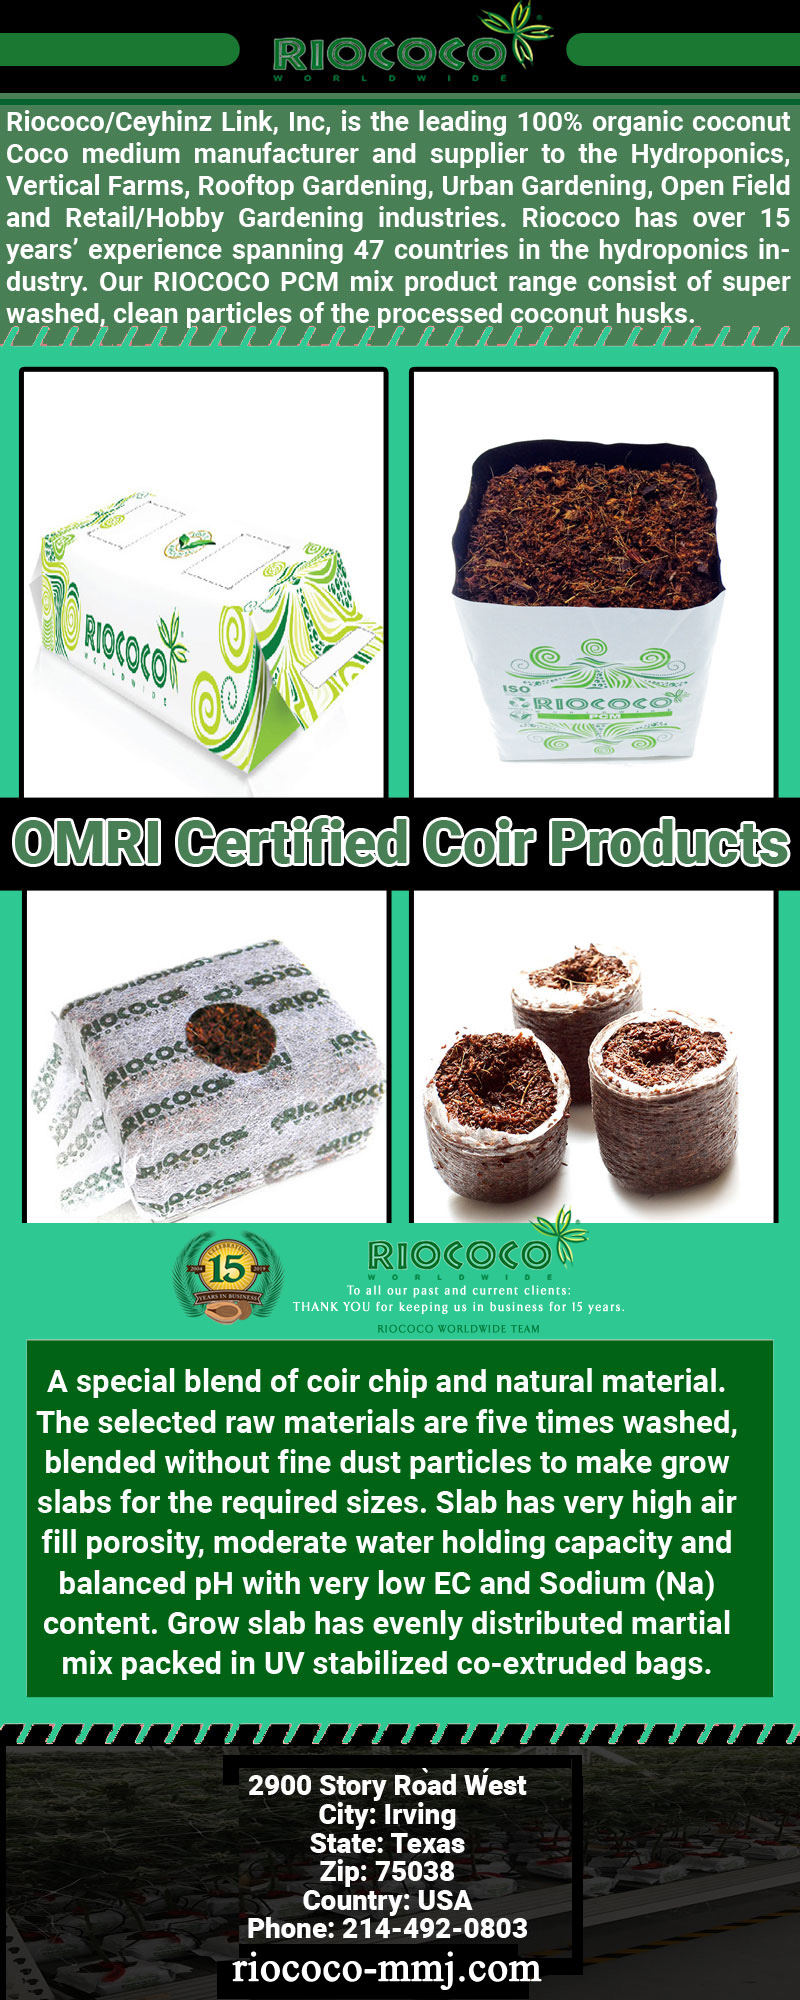 OMRI Certified Coir Products.jpg  by riococommj